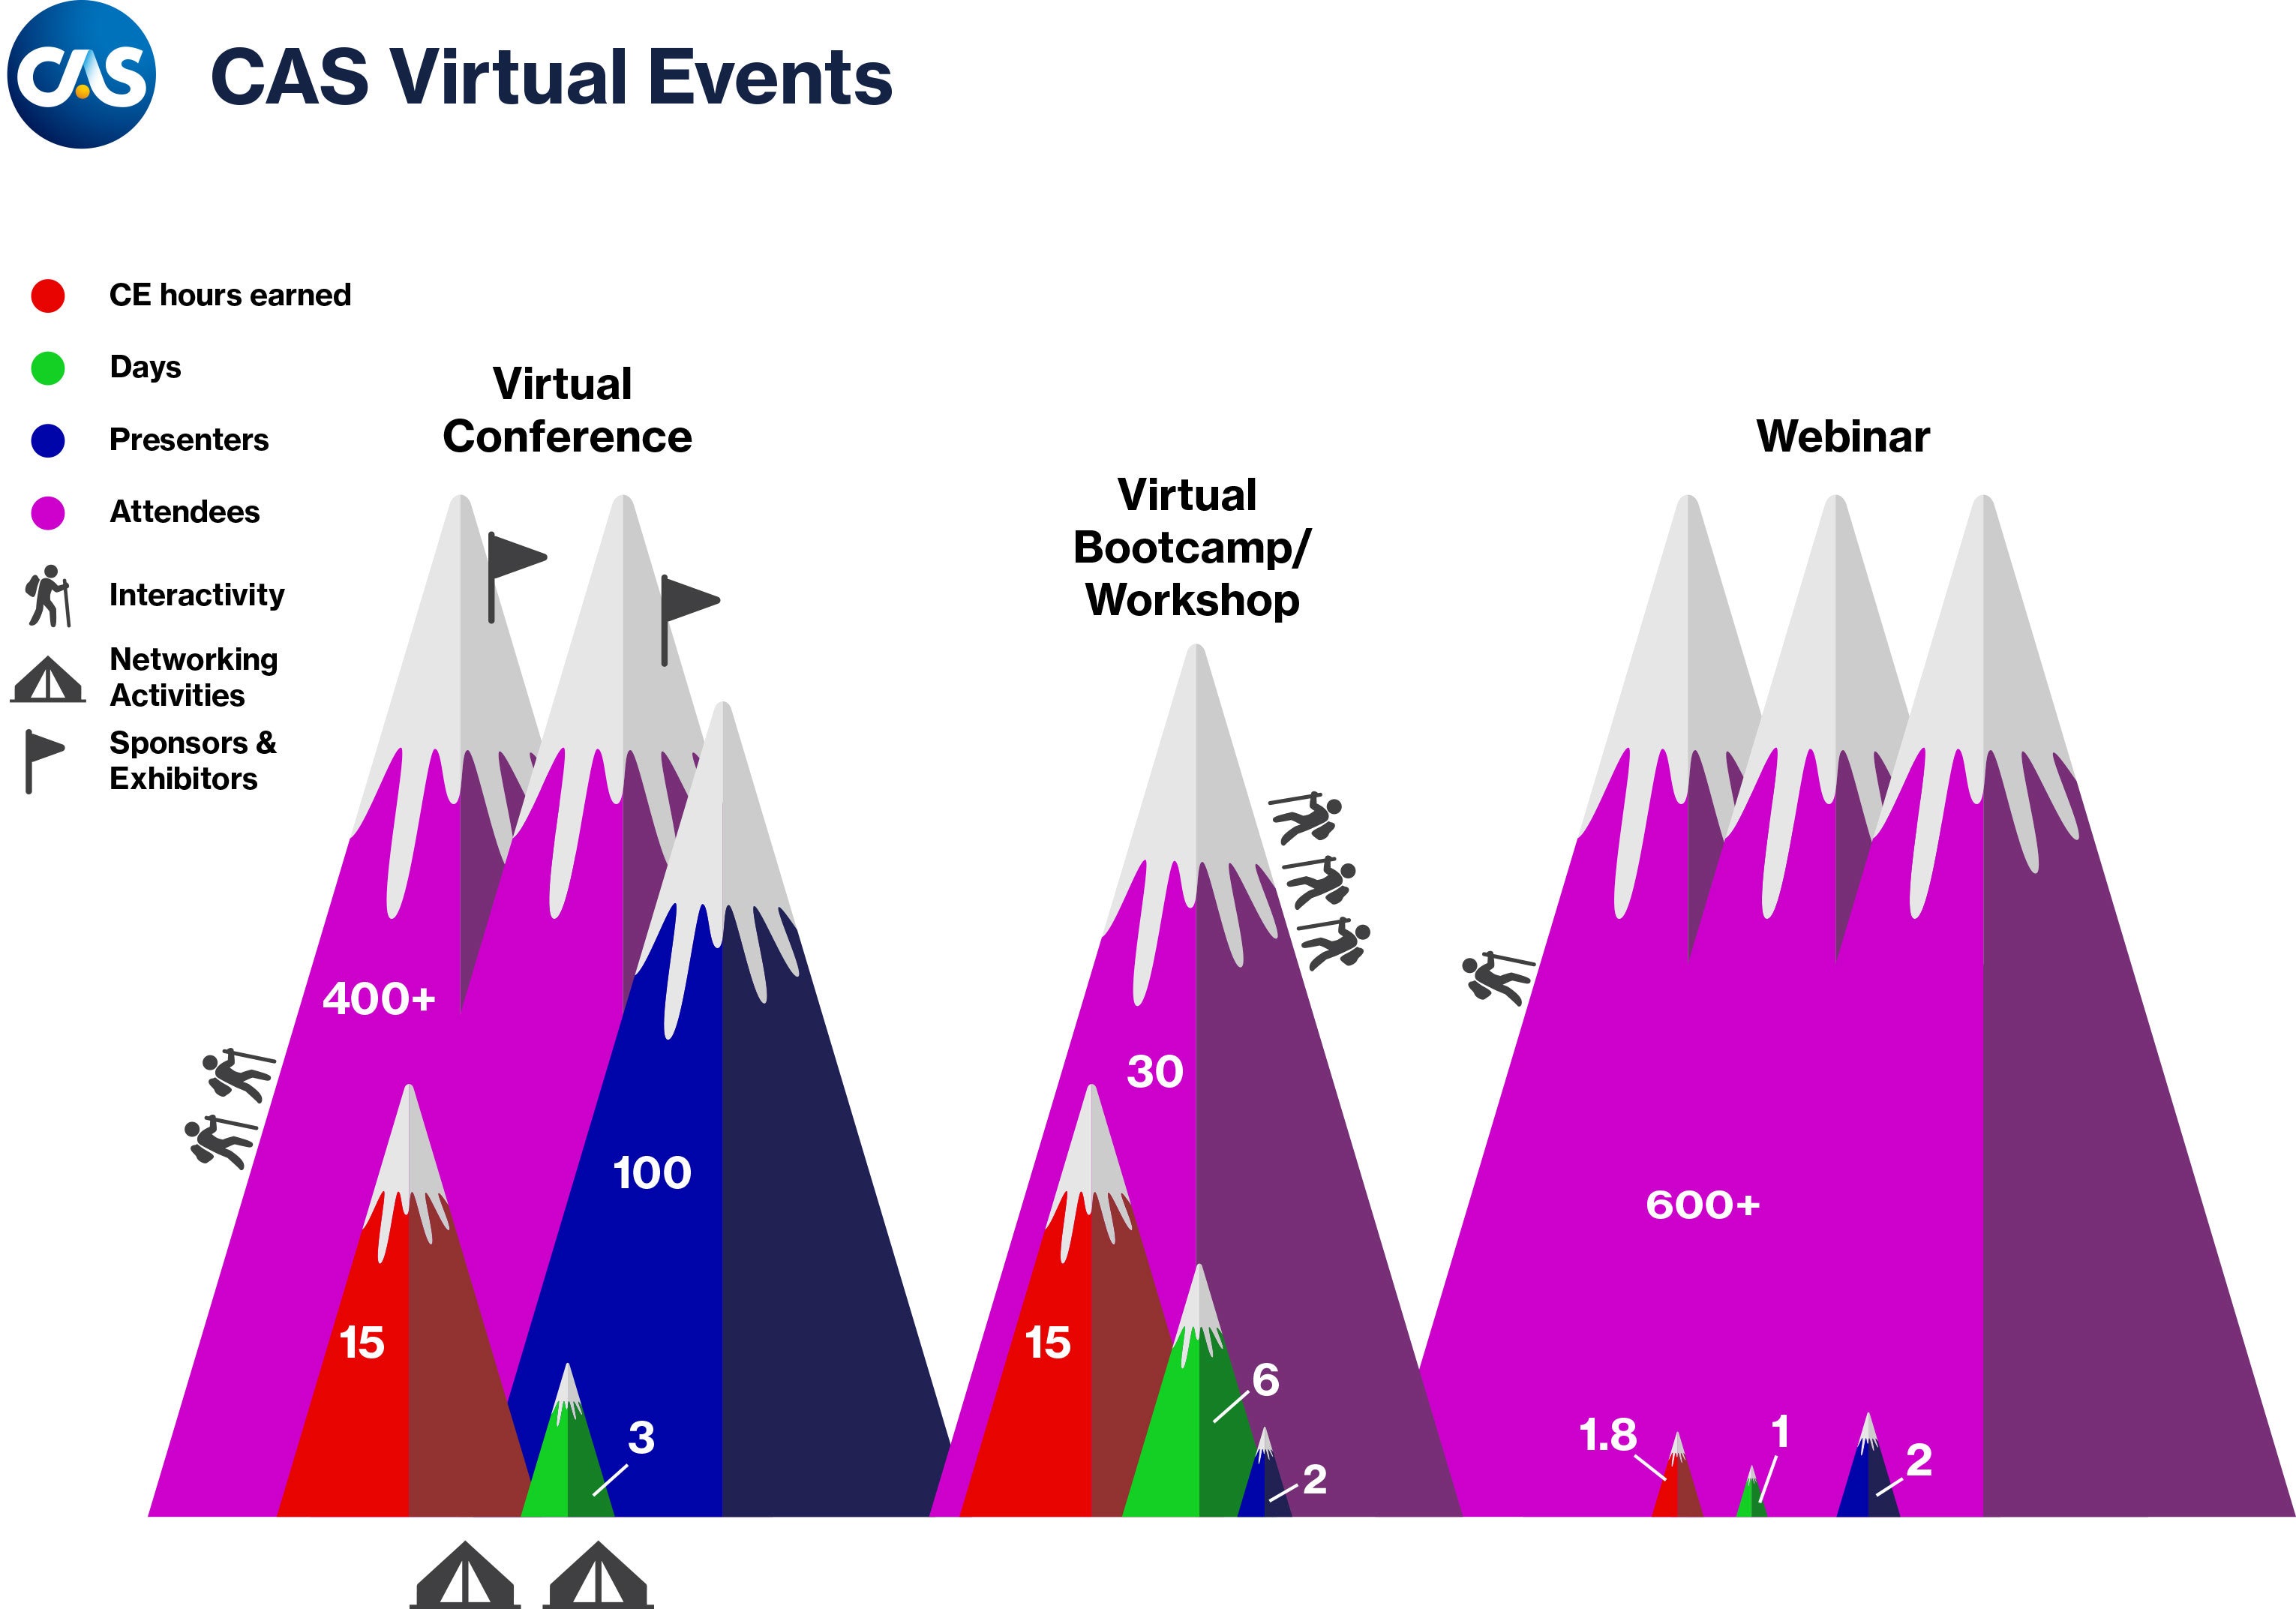 CAS Virtual Events Infographic